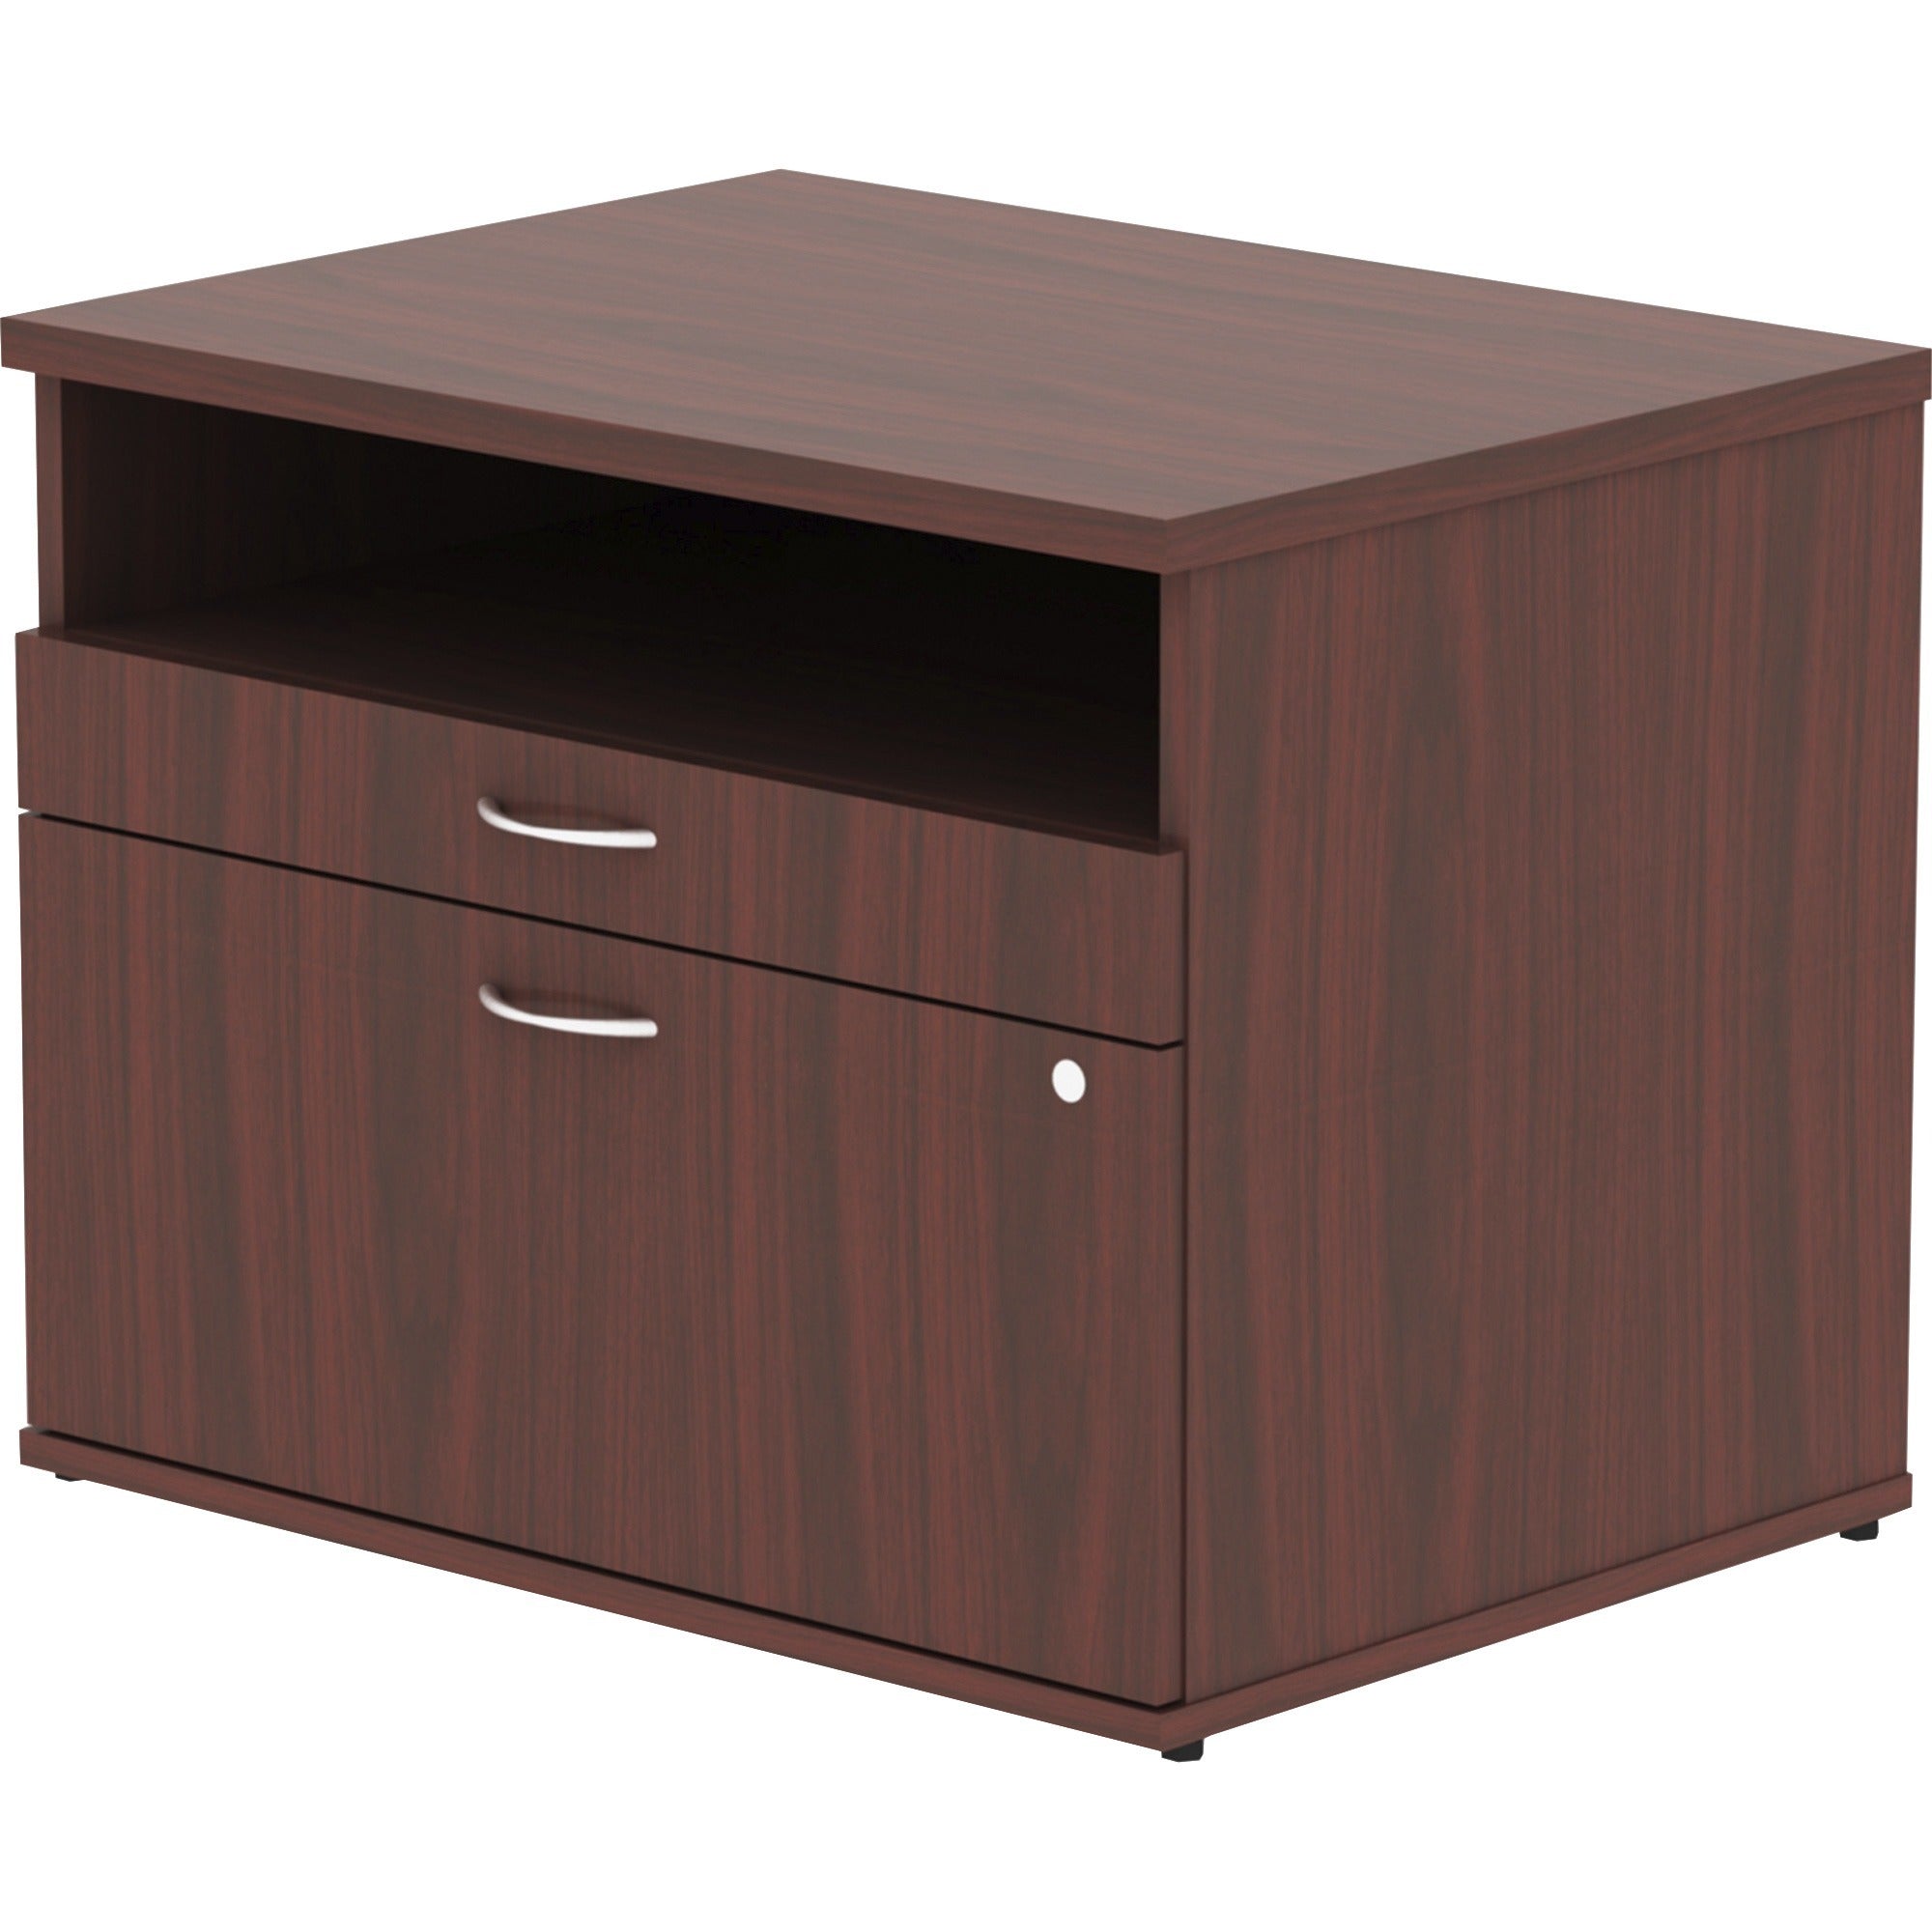 lorell-relevance-series-2-drawer-file-cabinet-credenza-w-open-shelf-295-x-22231-2-x-file-drawers-1-shelves-finish-mahogany-laminate_llr16212 - 3